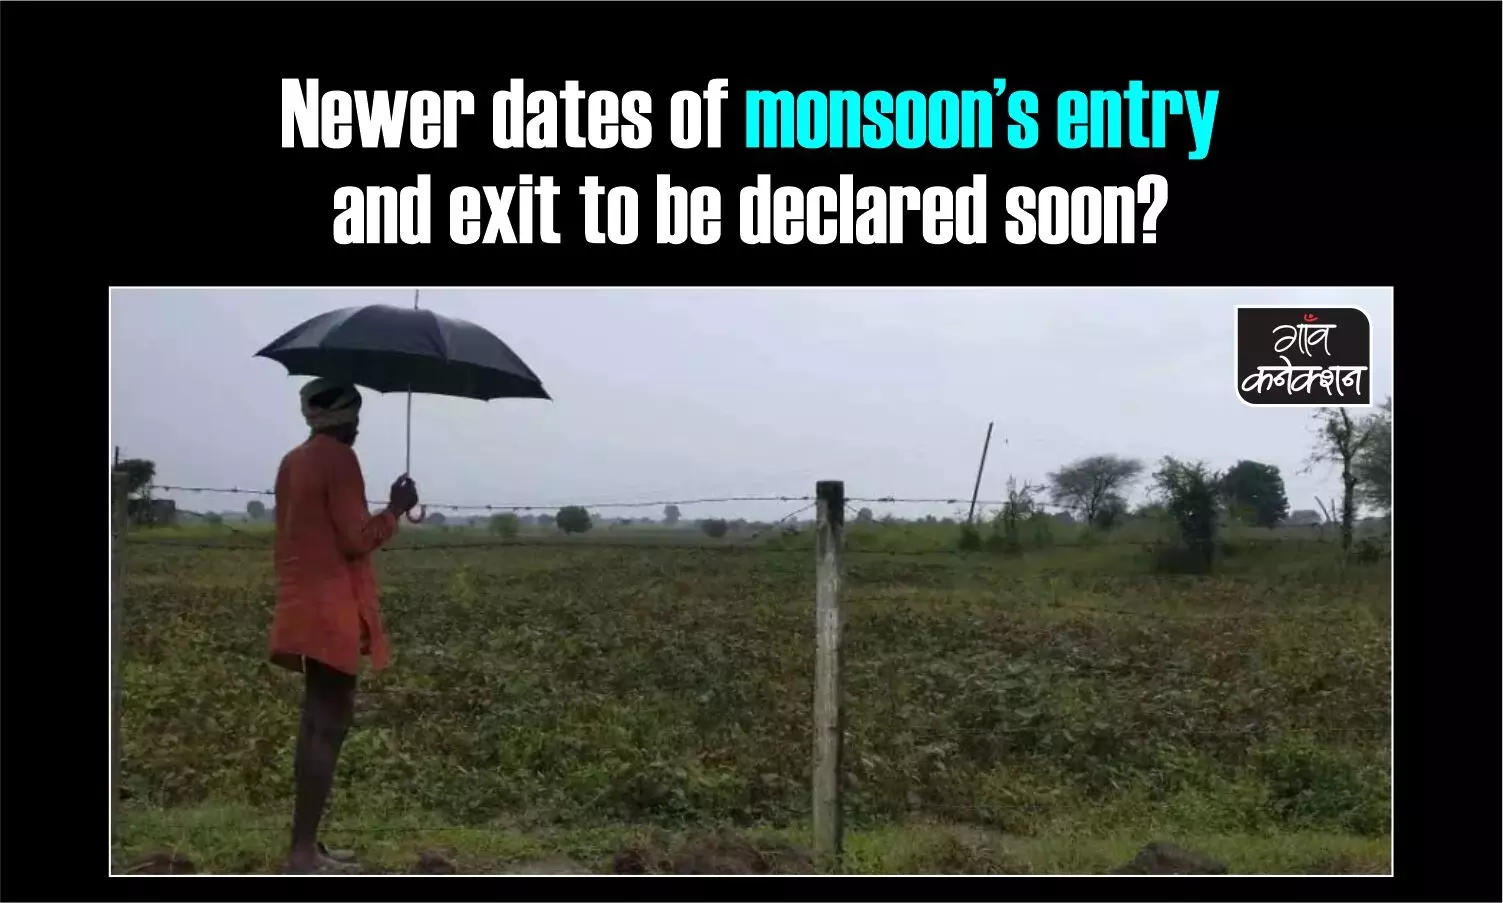 Thousands of farmers in India are ruined due to the altered monsoon activity